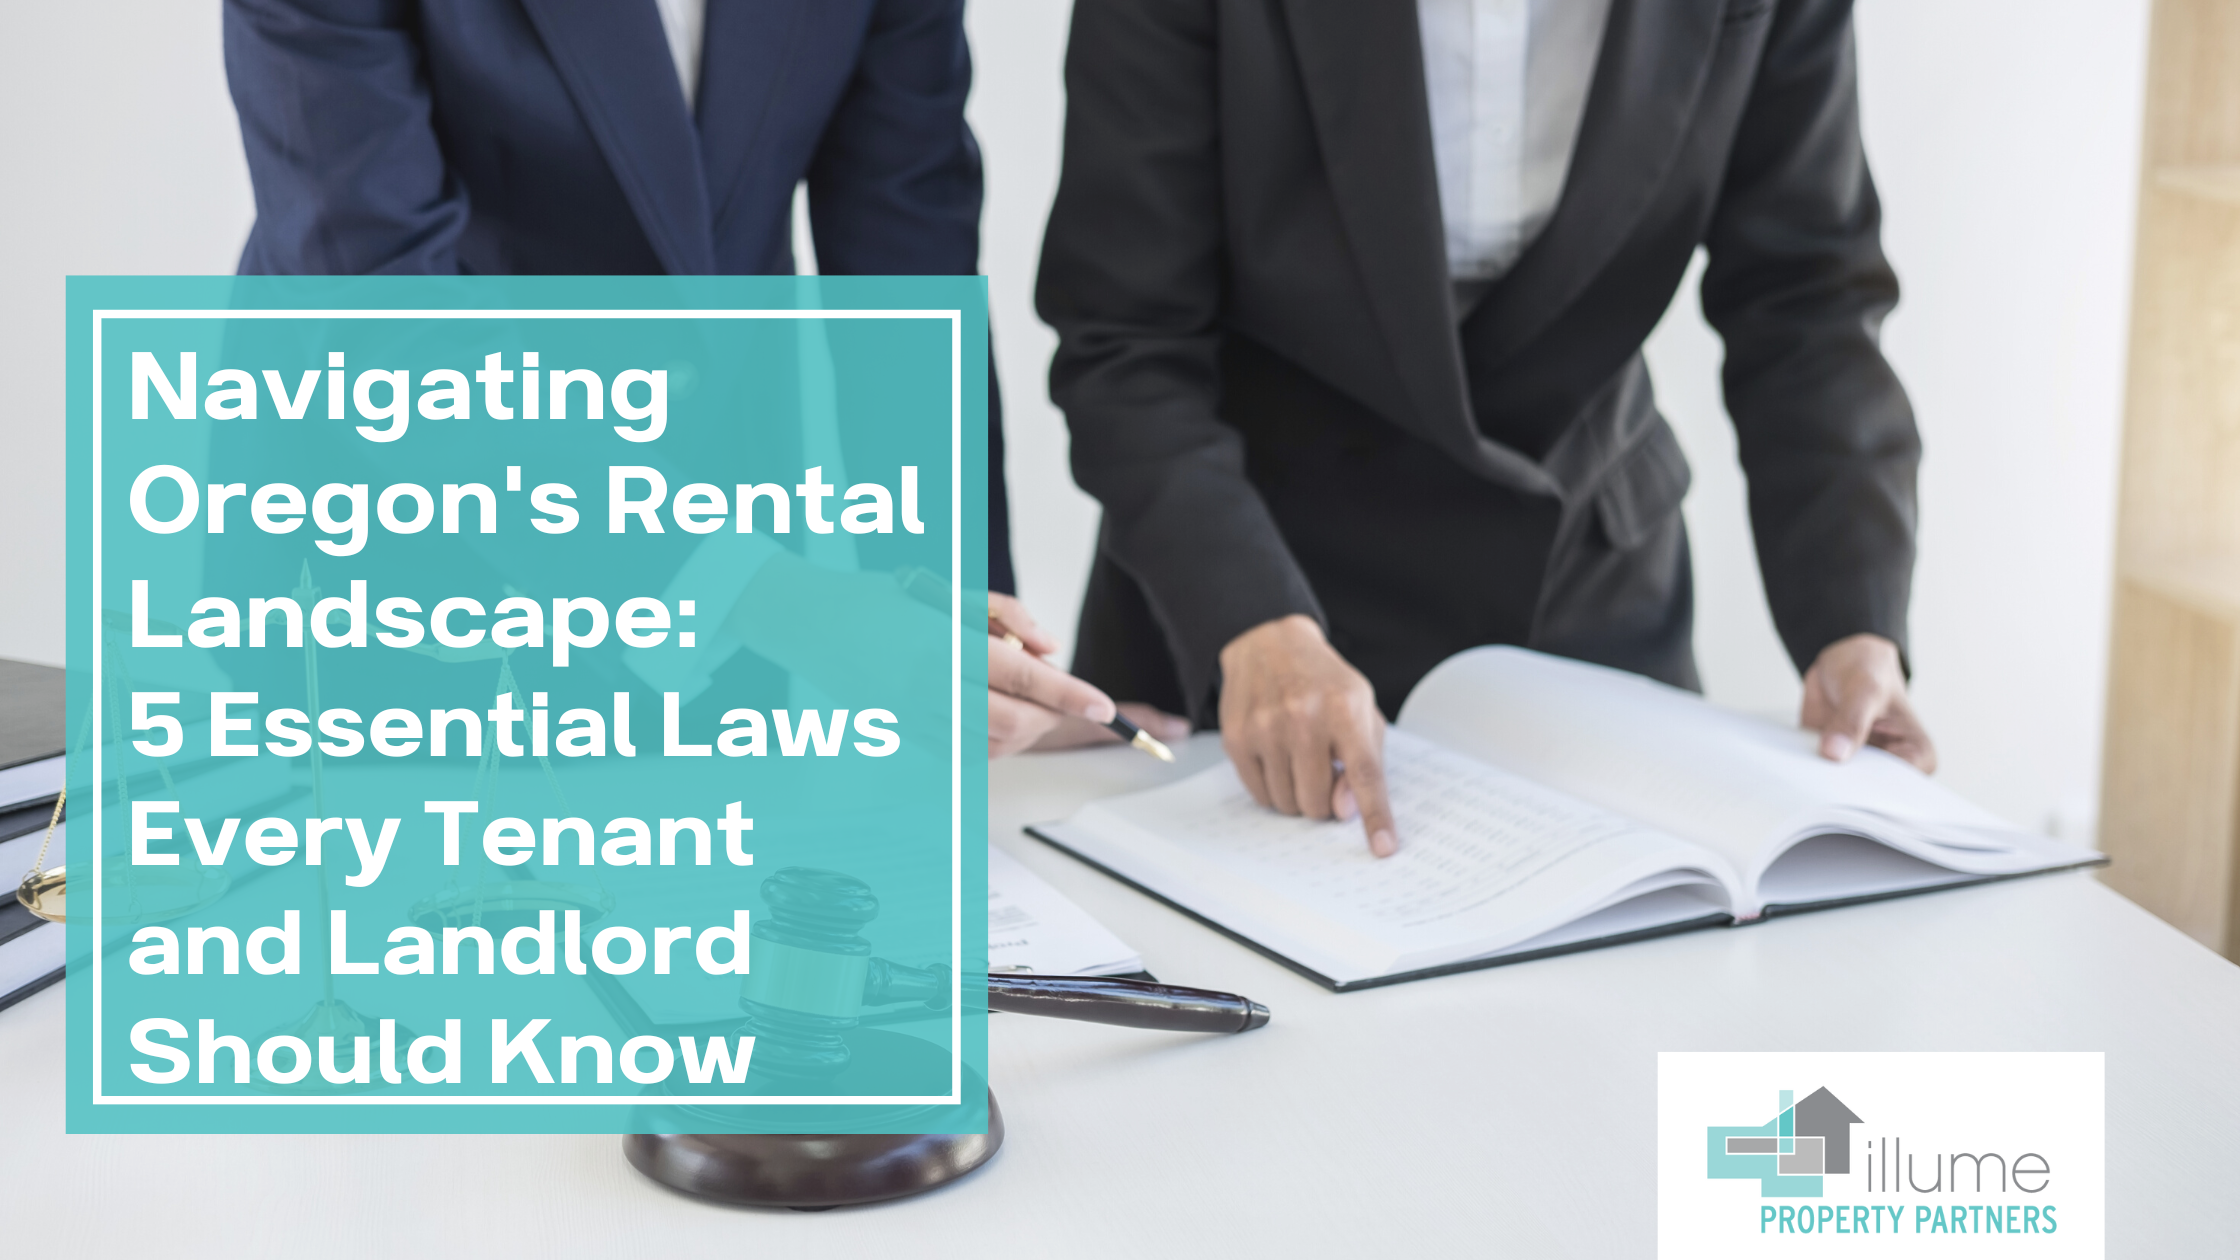 Navigating Oregon's Rental Landscape: 5 Essential Laws Every Tenant and Landlord Should Know